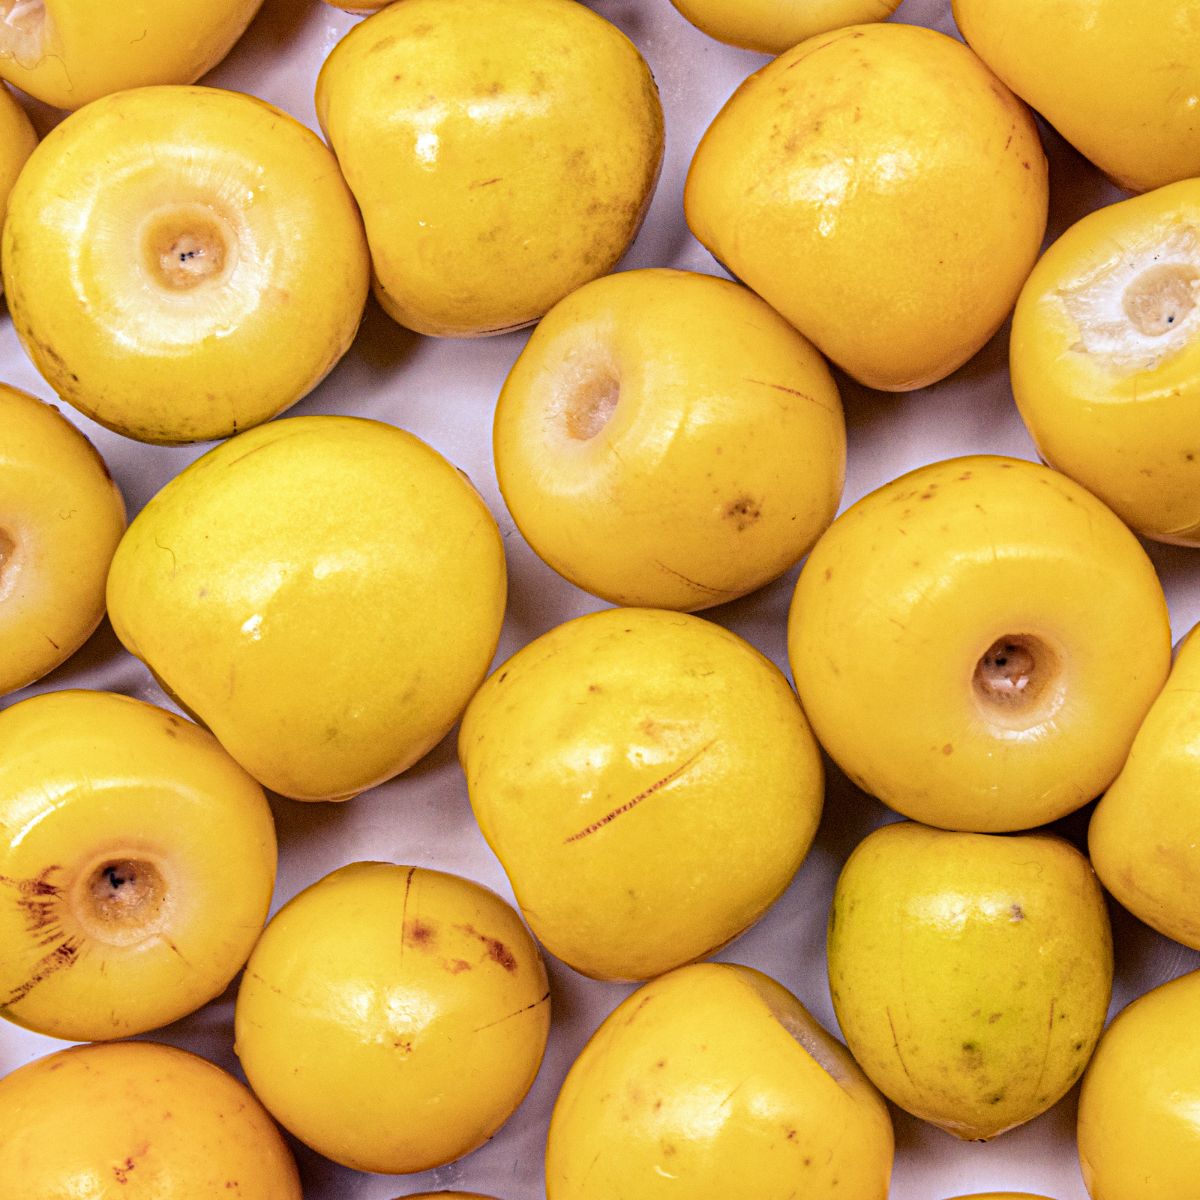 A bunch of nance fruits (small yellow fruits) spread on a counter. 